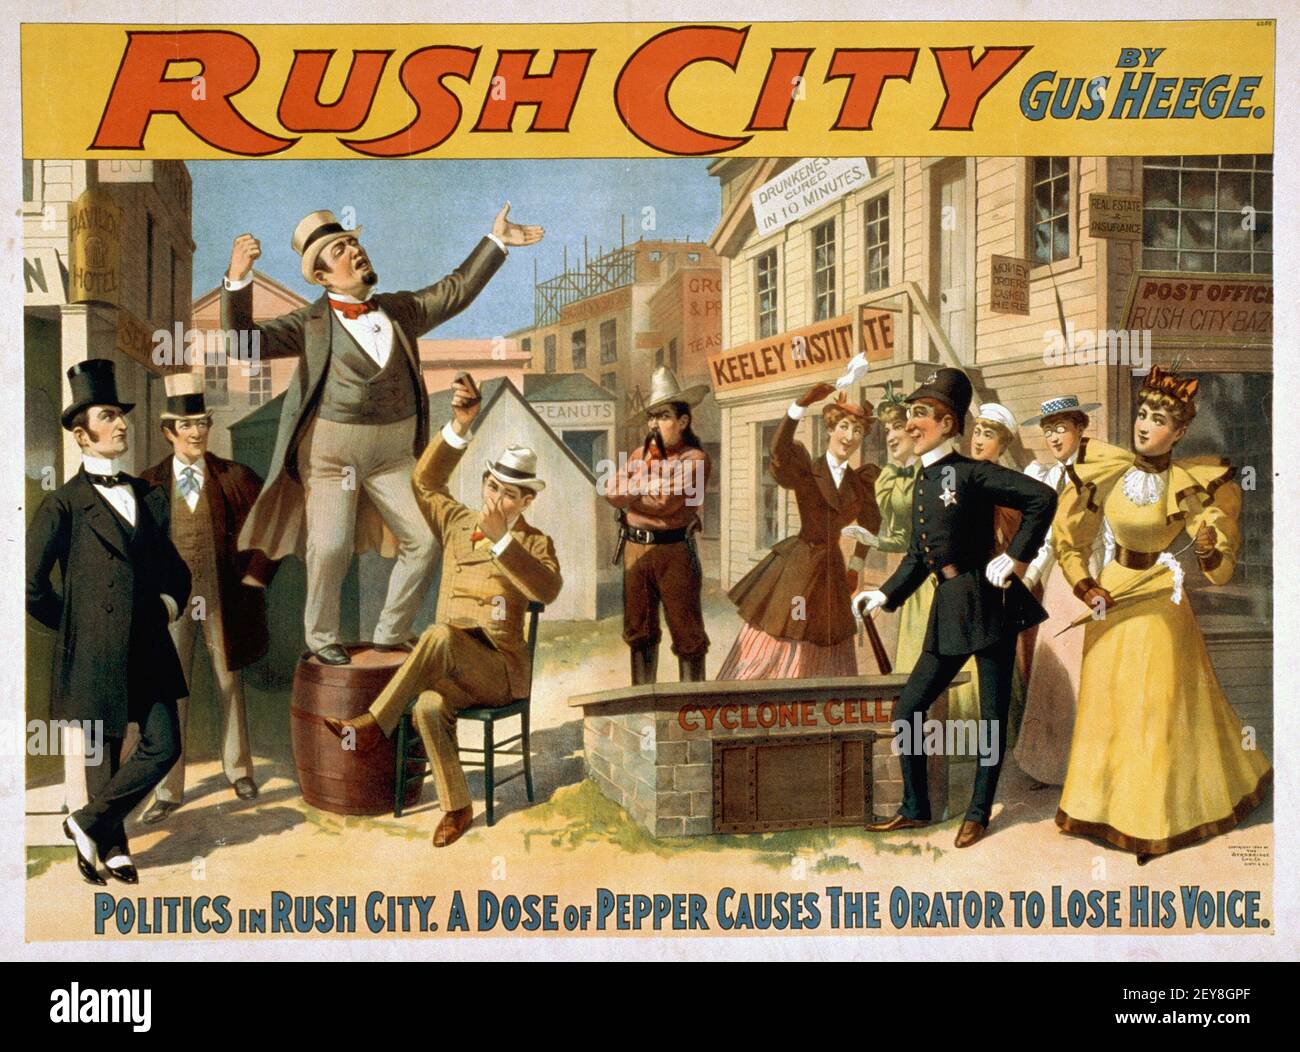 Rush City by Gus Heege. Classic Poster, old and vintage style. Politics in Rush City. Cin'ti ; N.Y. : Strobridge Lith. Co., c 1894. Stock Photo